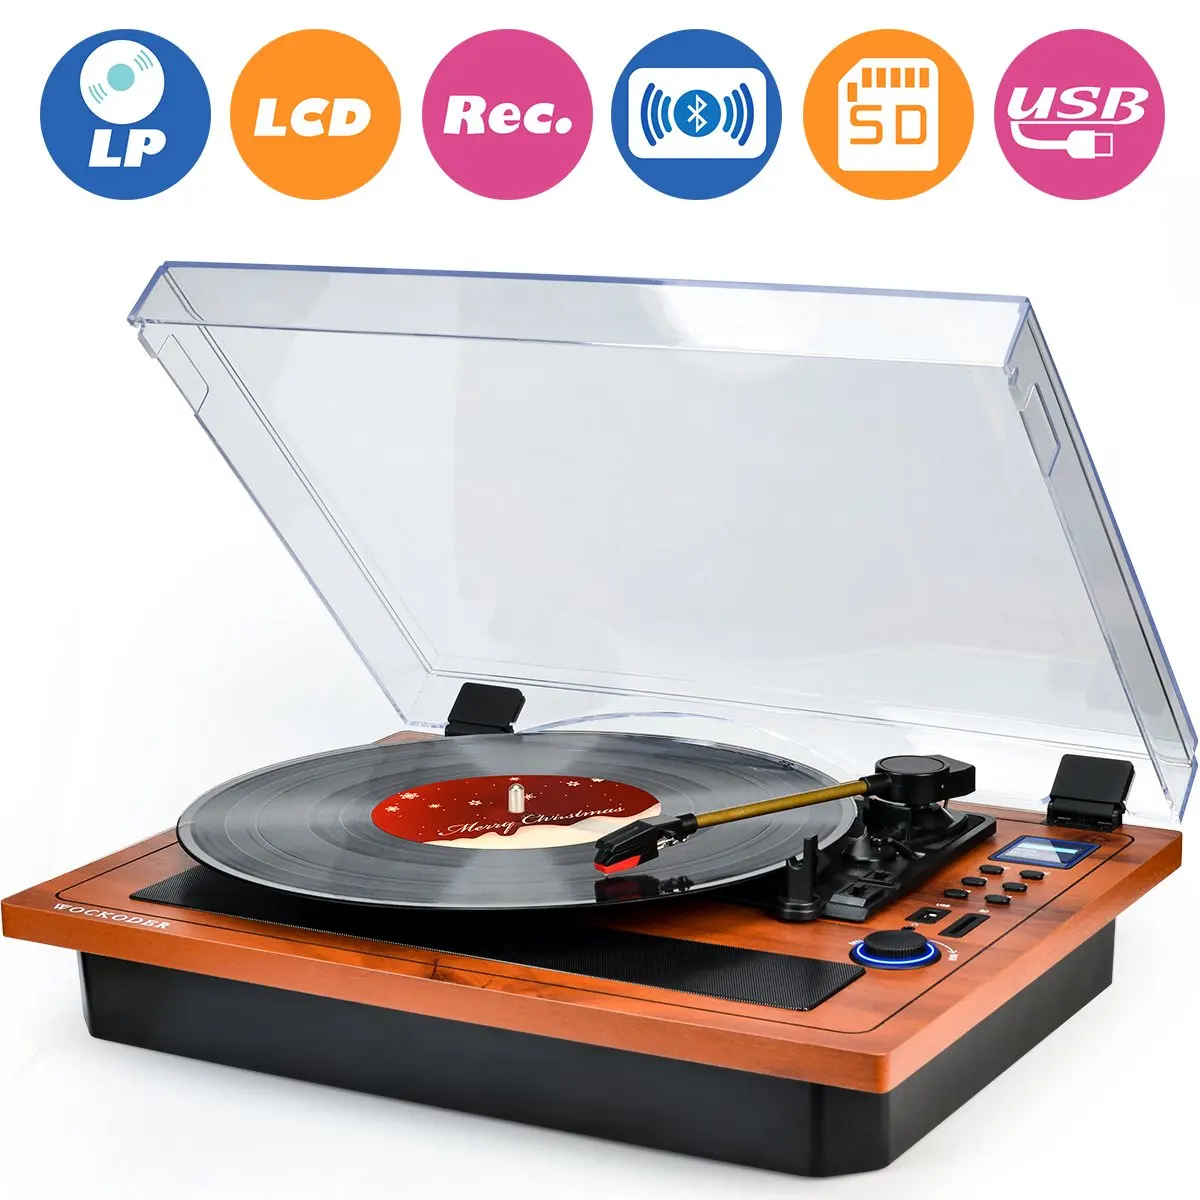 Buy Turntable Vinyl Record Player Wireless Bluetooth In & Out Record ...